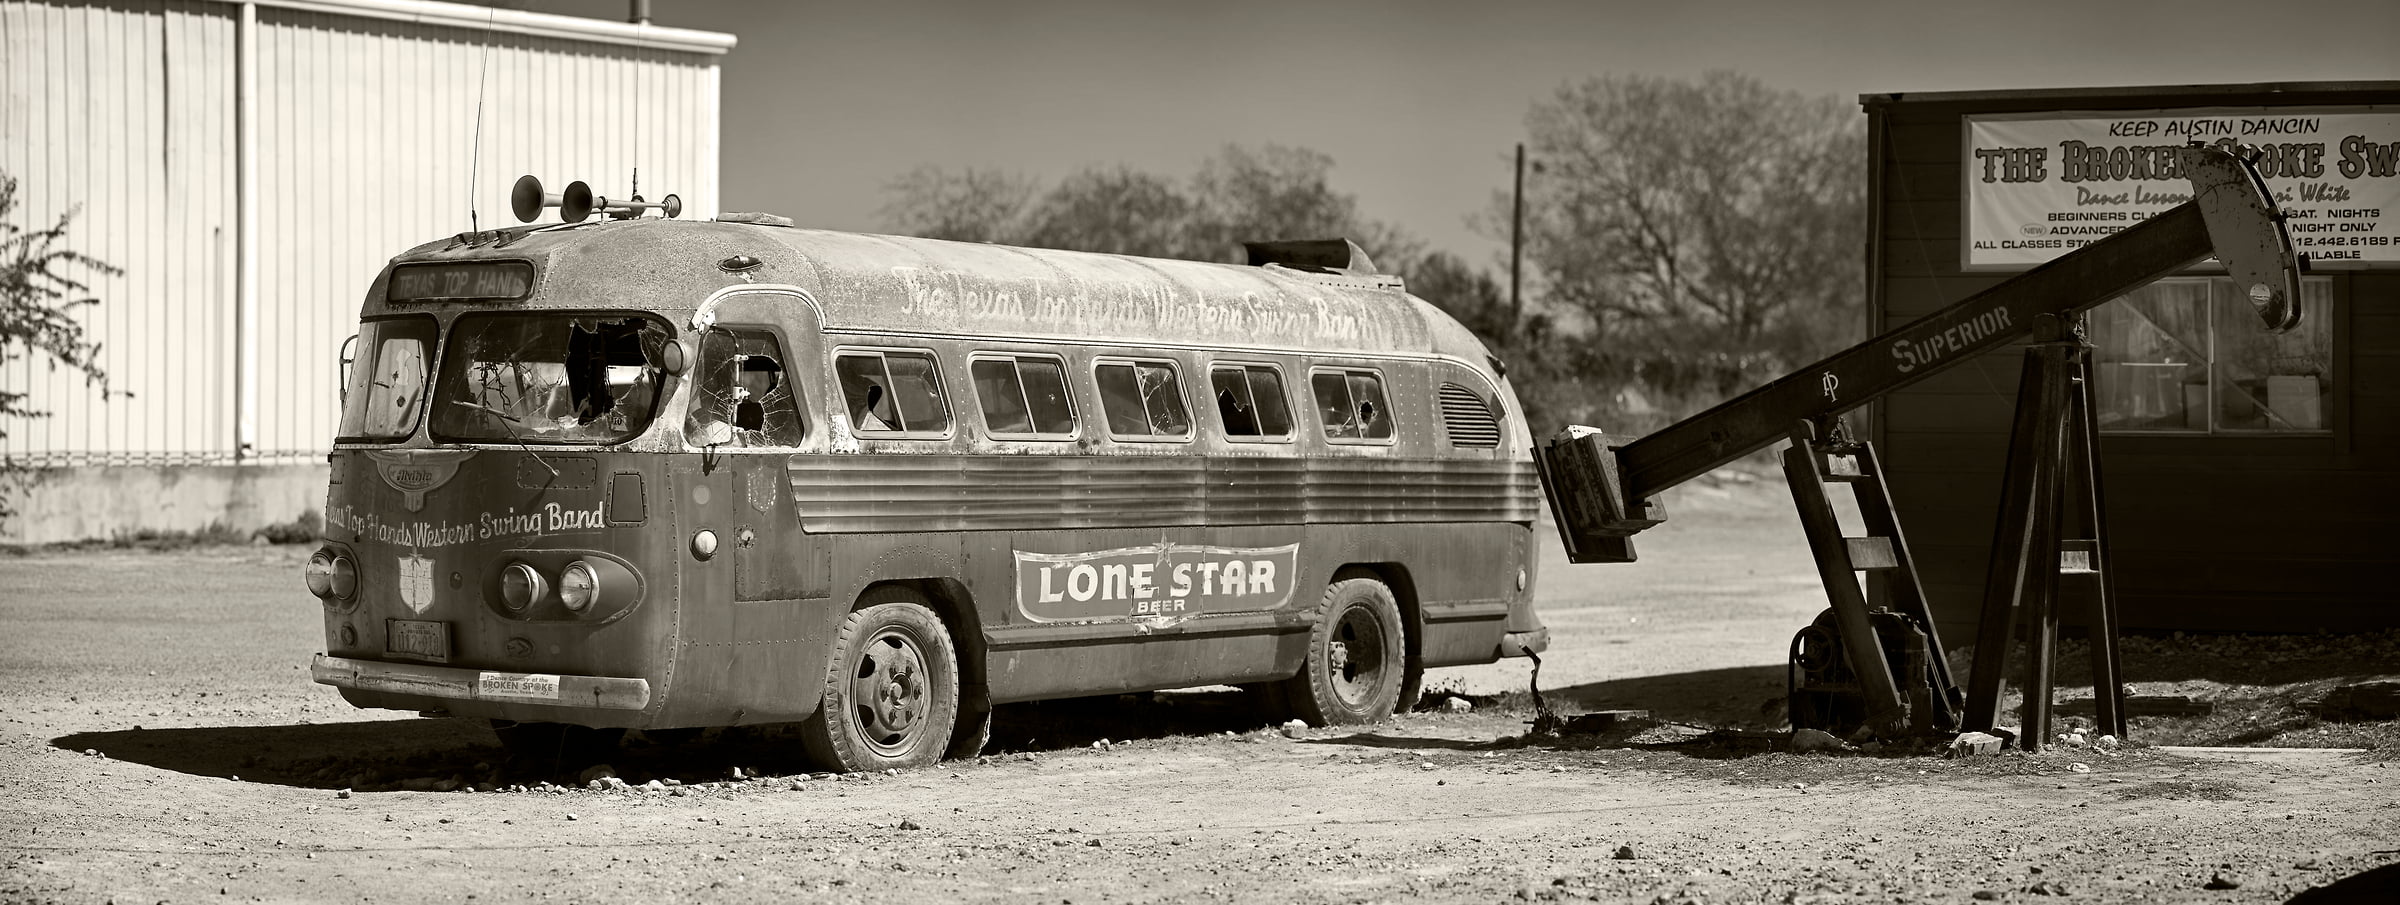 364 megapixels! A very high resolution fine art photograph of an old iconic bus that is emblamatic of Texas culture; VAST photo created by Phil Crawshay in Texas